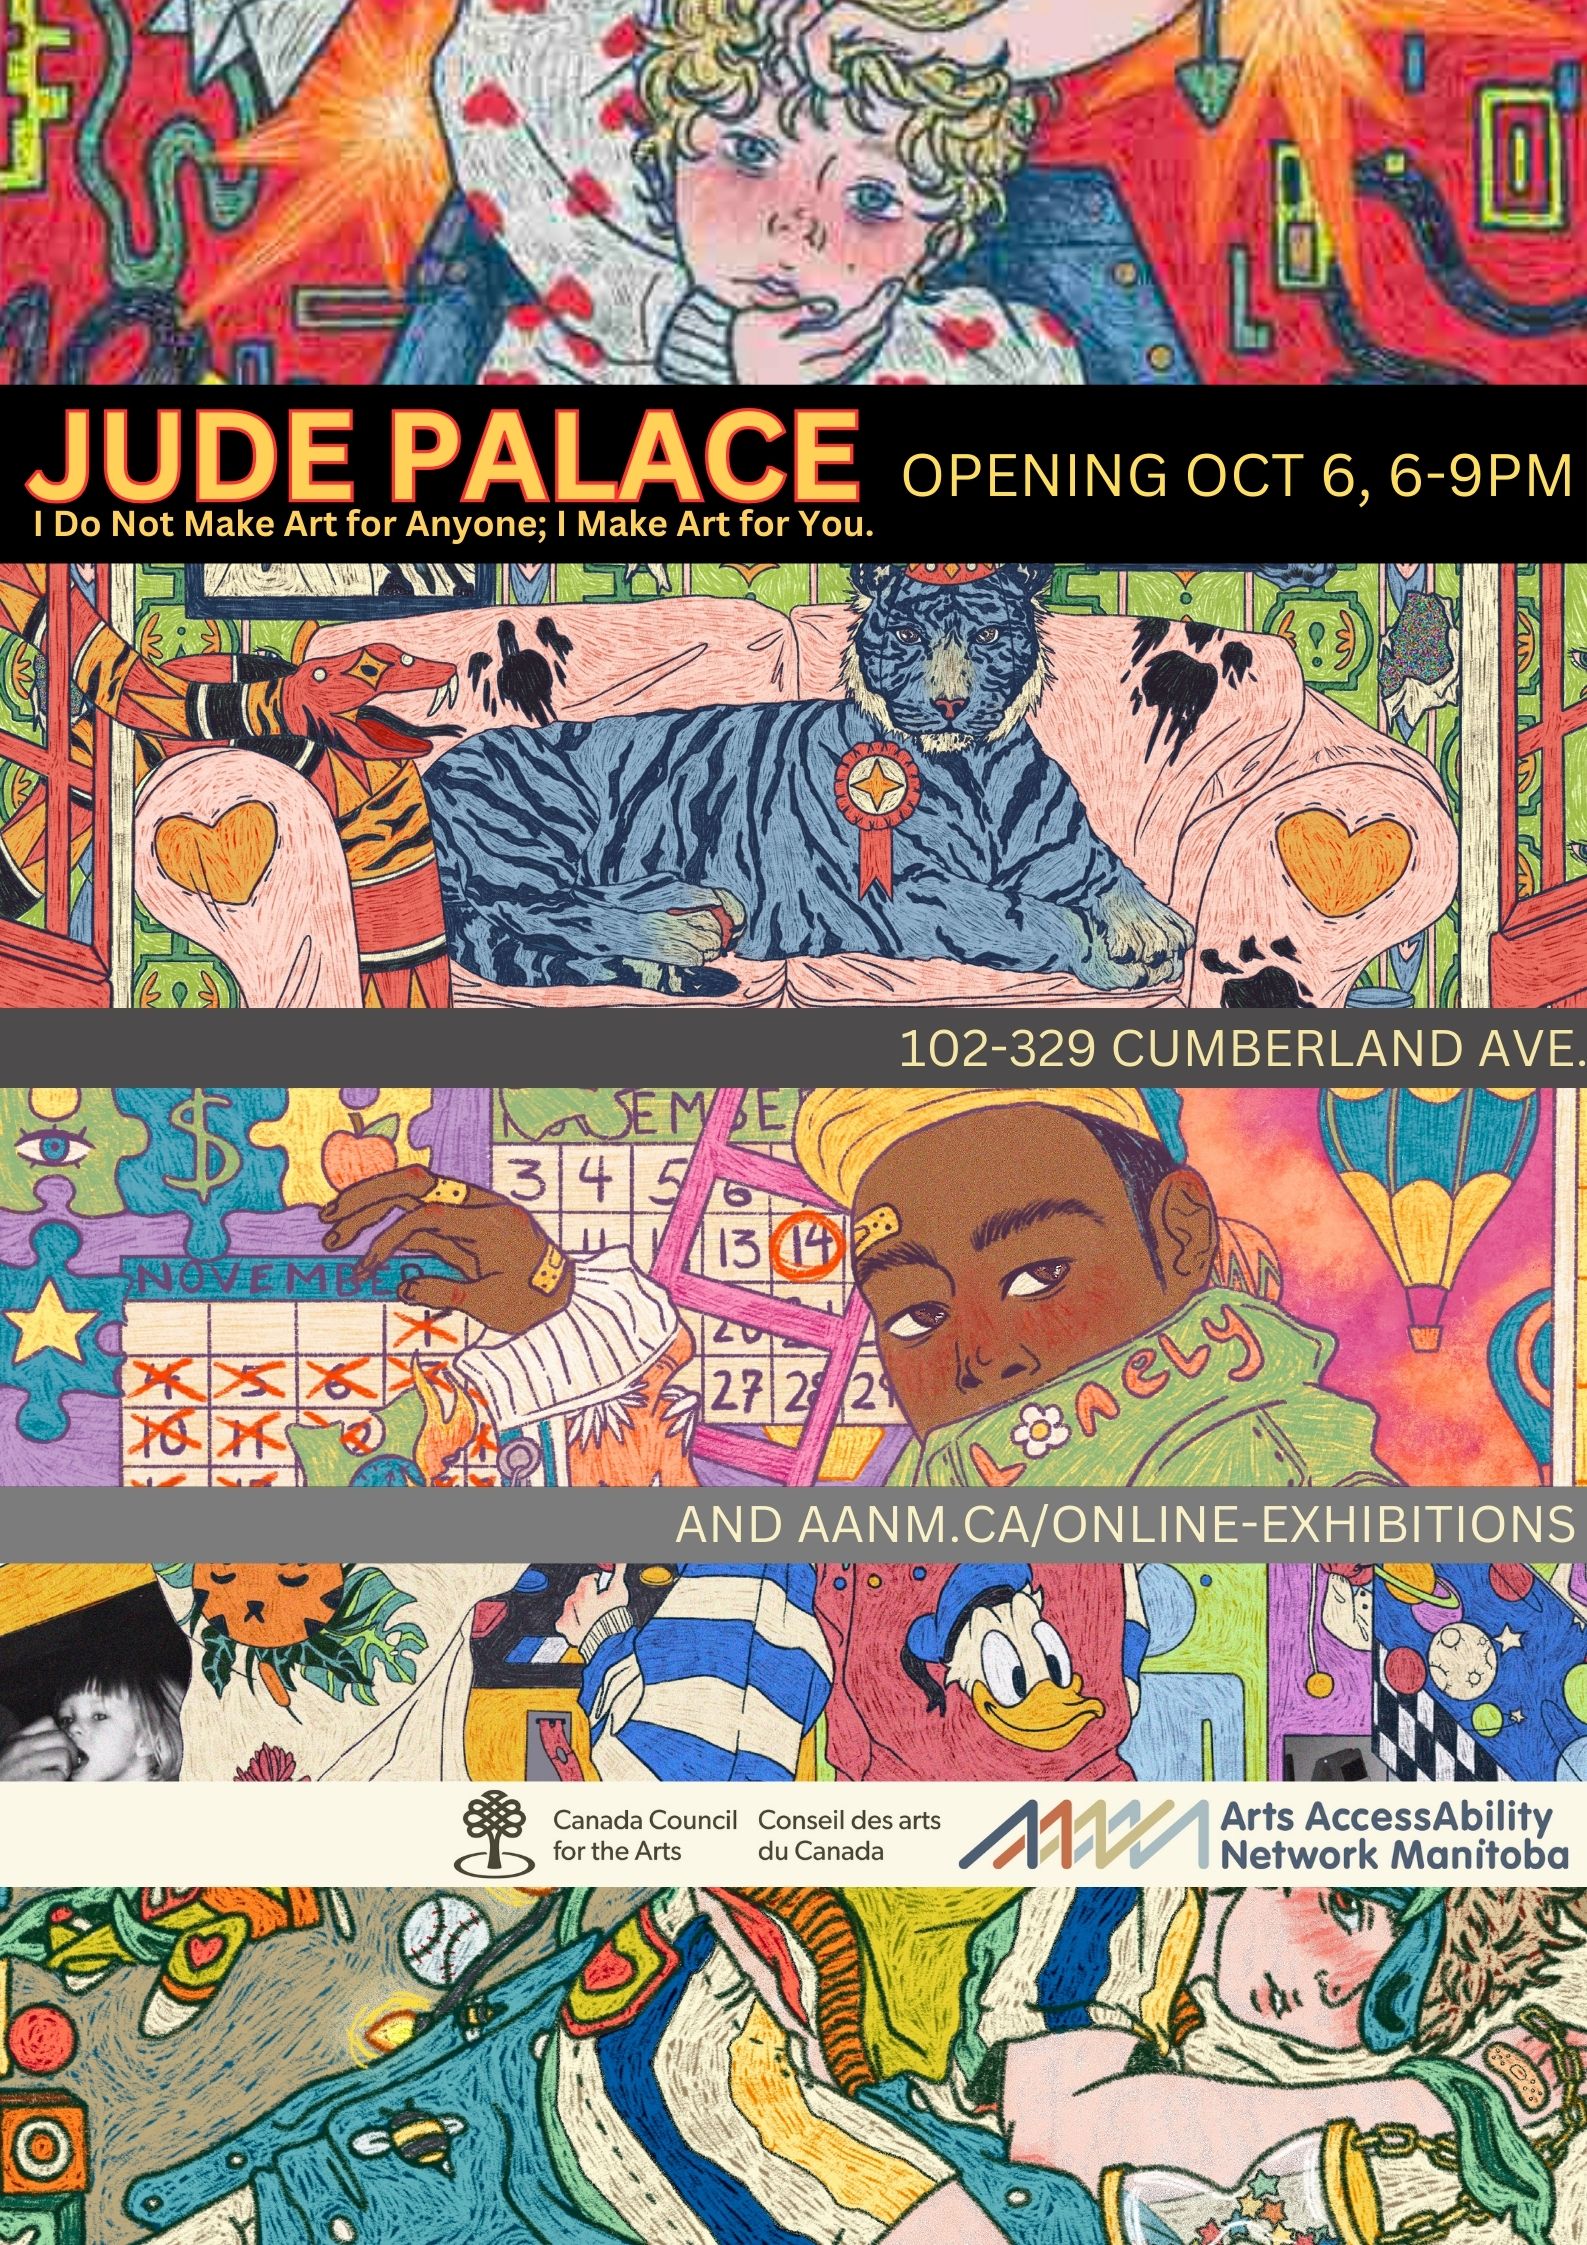 This is a poster advertising Jude Palace’s digital drawing show at AANM Gallery102-329 Cumberland Avenue, opening October 6 from 6-9pm, and available online at aanm.ca/online-exhibitions. These details are displayed in lines of plain, bright high-contrast text, sandwiched between slices sampled from Palace’s work, along with the logos of the funder, Canada Council for the Arts, and AANM, as well as the title of the show, “I Do Not Make Art for Anyone; I Make Art for You.” Palace’s work is busy, exuberant, tragic, and appears as a chaotic jumble of bright colours, creating an intriguing narrative. Visible in the top image detail is a young, blonde boy with large blue eyes, calmly meeting our gaze, as the hands of someone in a white sweater studded with red hearts grasps his chin and hair as if preparing to wrench his head violently. The background is bright red with abstract lines snaking among orange and yellow star/explosions. In the image below that, we see a blue tiger sitting regally on a pink shabby sofa. A snake patterned with red, orange, and black is seen entering through a window and baring its fangs towards the tiger, who is sporting an award ribbon on his furry chest. The bottom image depicts a young Black boy in a yellow cap and green jacket, turning to meet our eye over his shoulder. On his collar in orange font is the word ‘lonely,’ in which the ‘o’ is denoted by a daisy. The boy is touching a wall calendar set to November, with a hand displaying bloody knuckles and multiple bandaids.